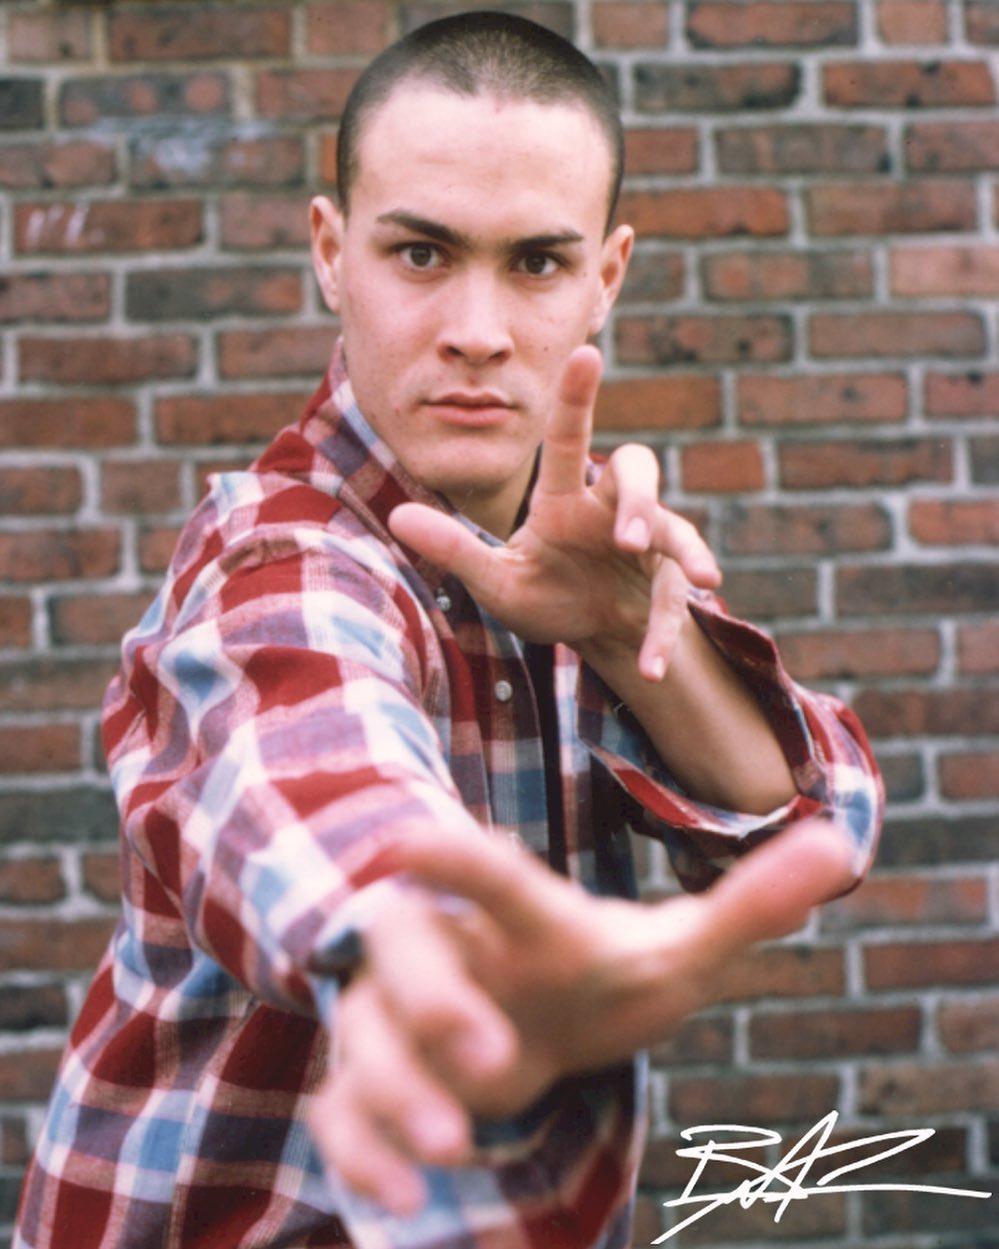 A photo showing Brandon Lee in a Martial Arts pose.